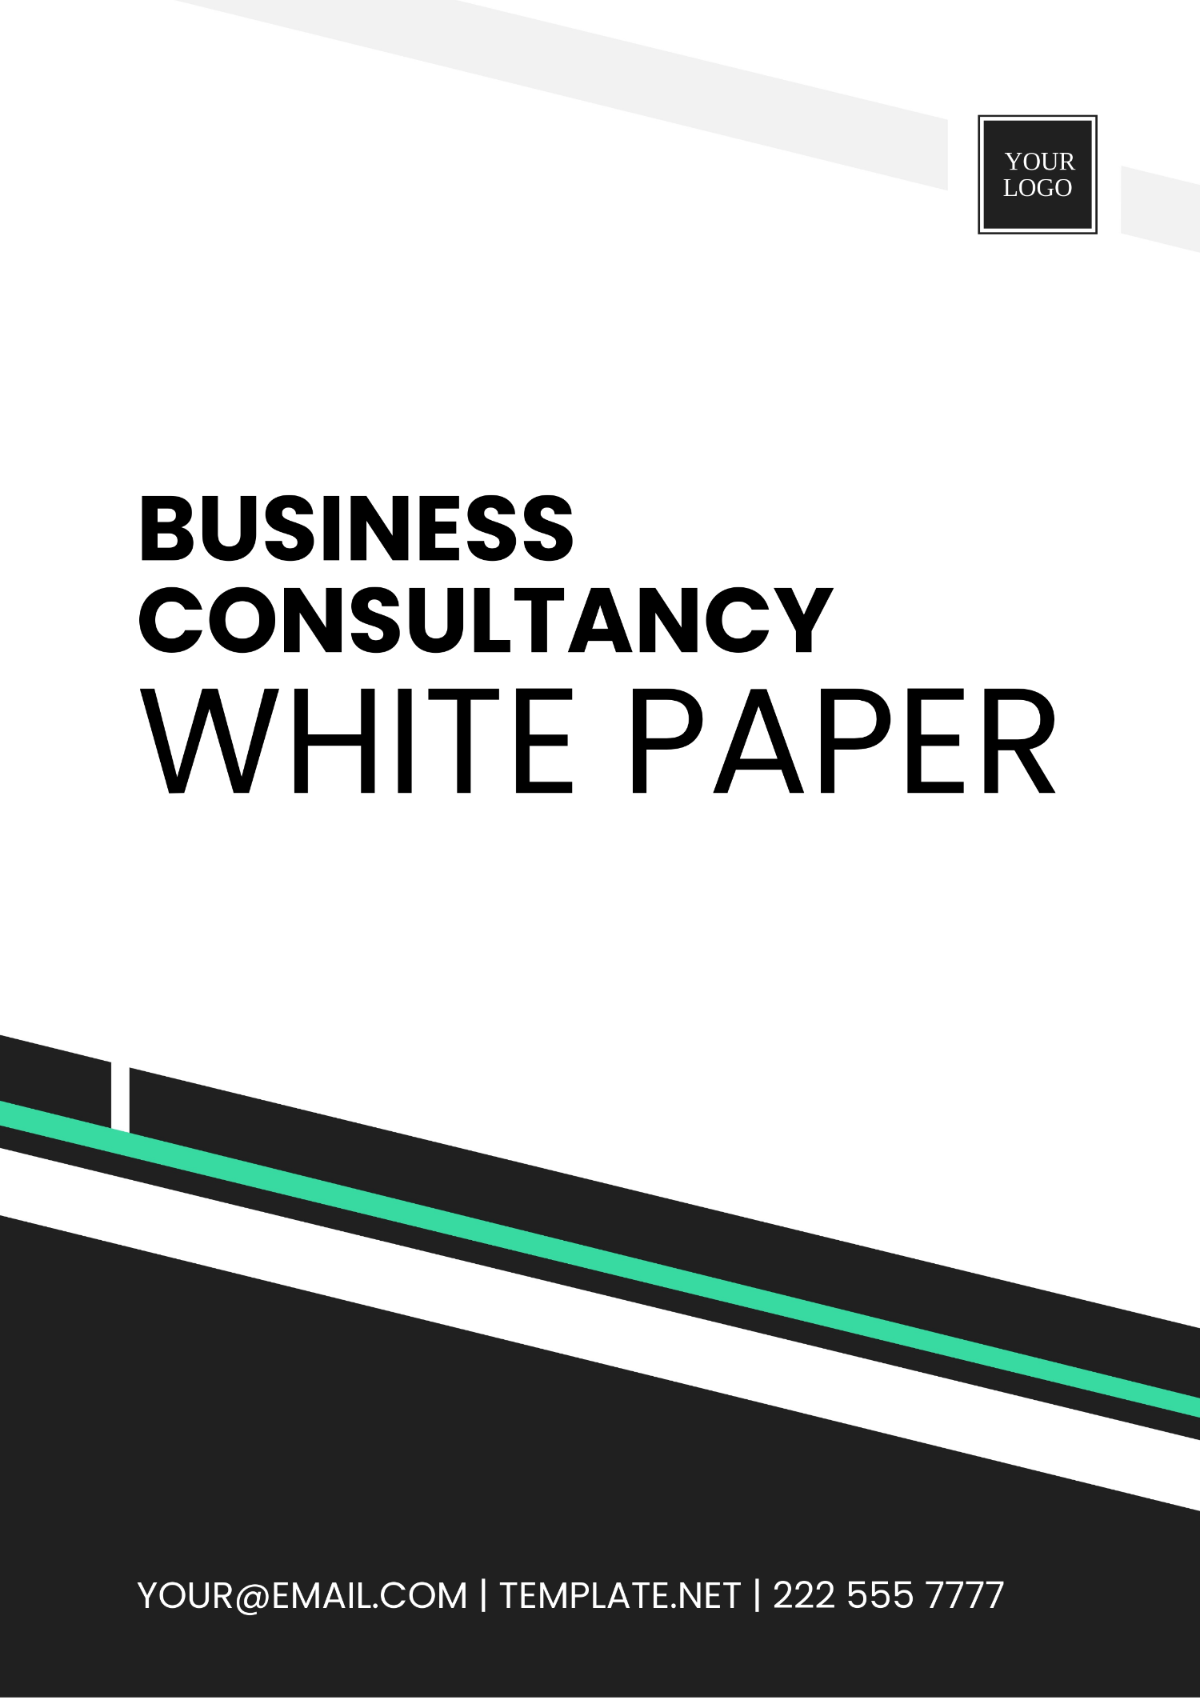 Business Consultancy White Paper Template